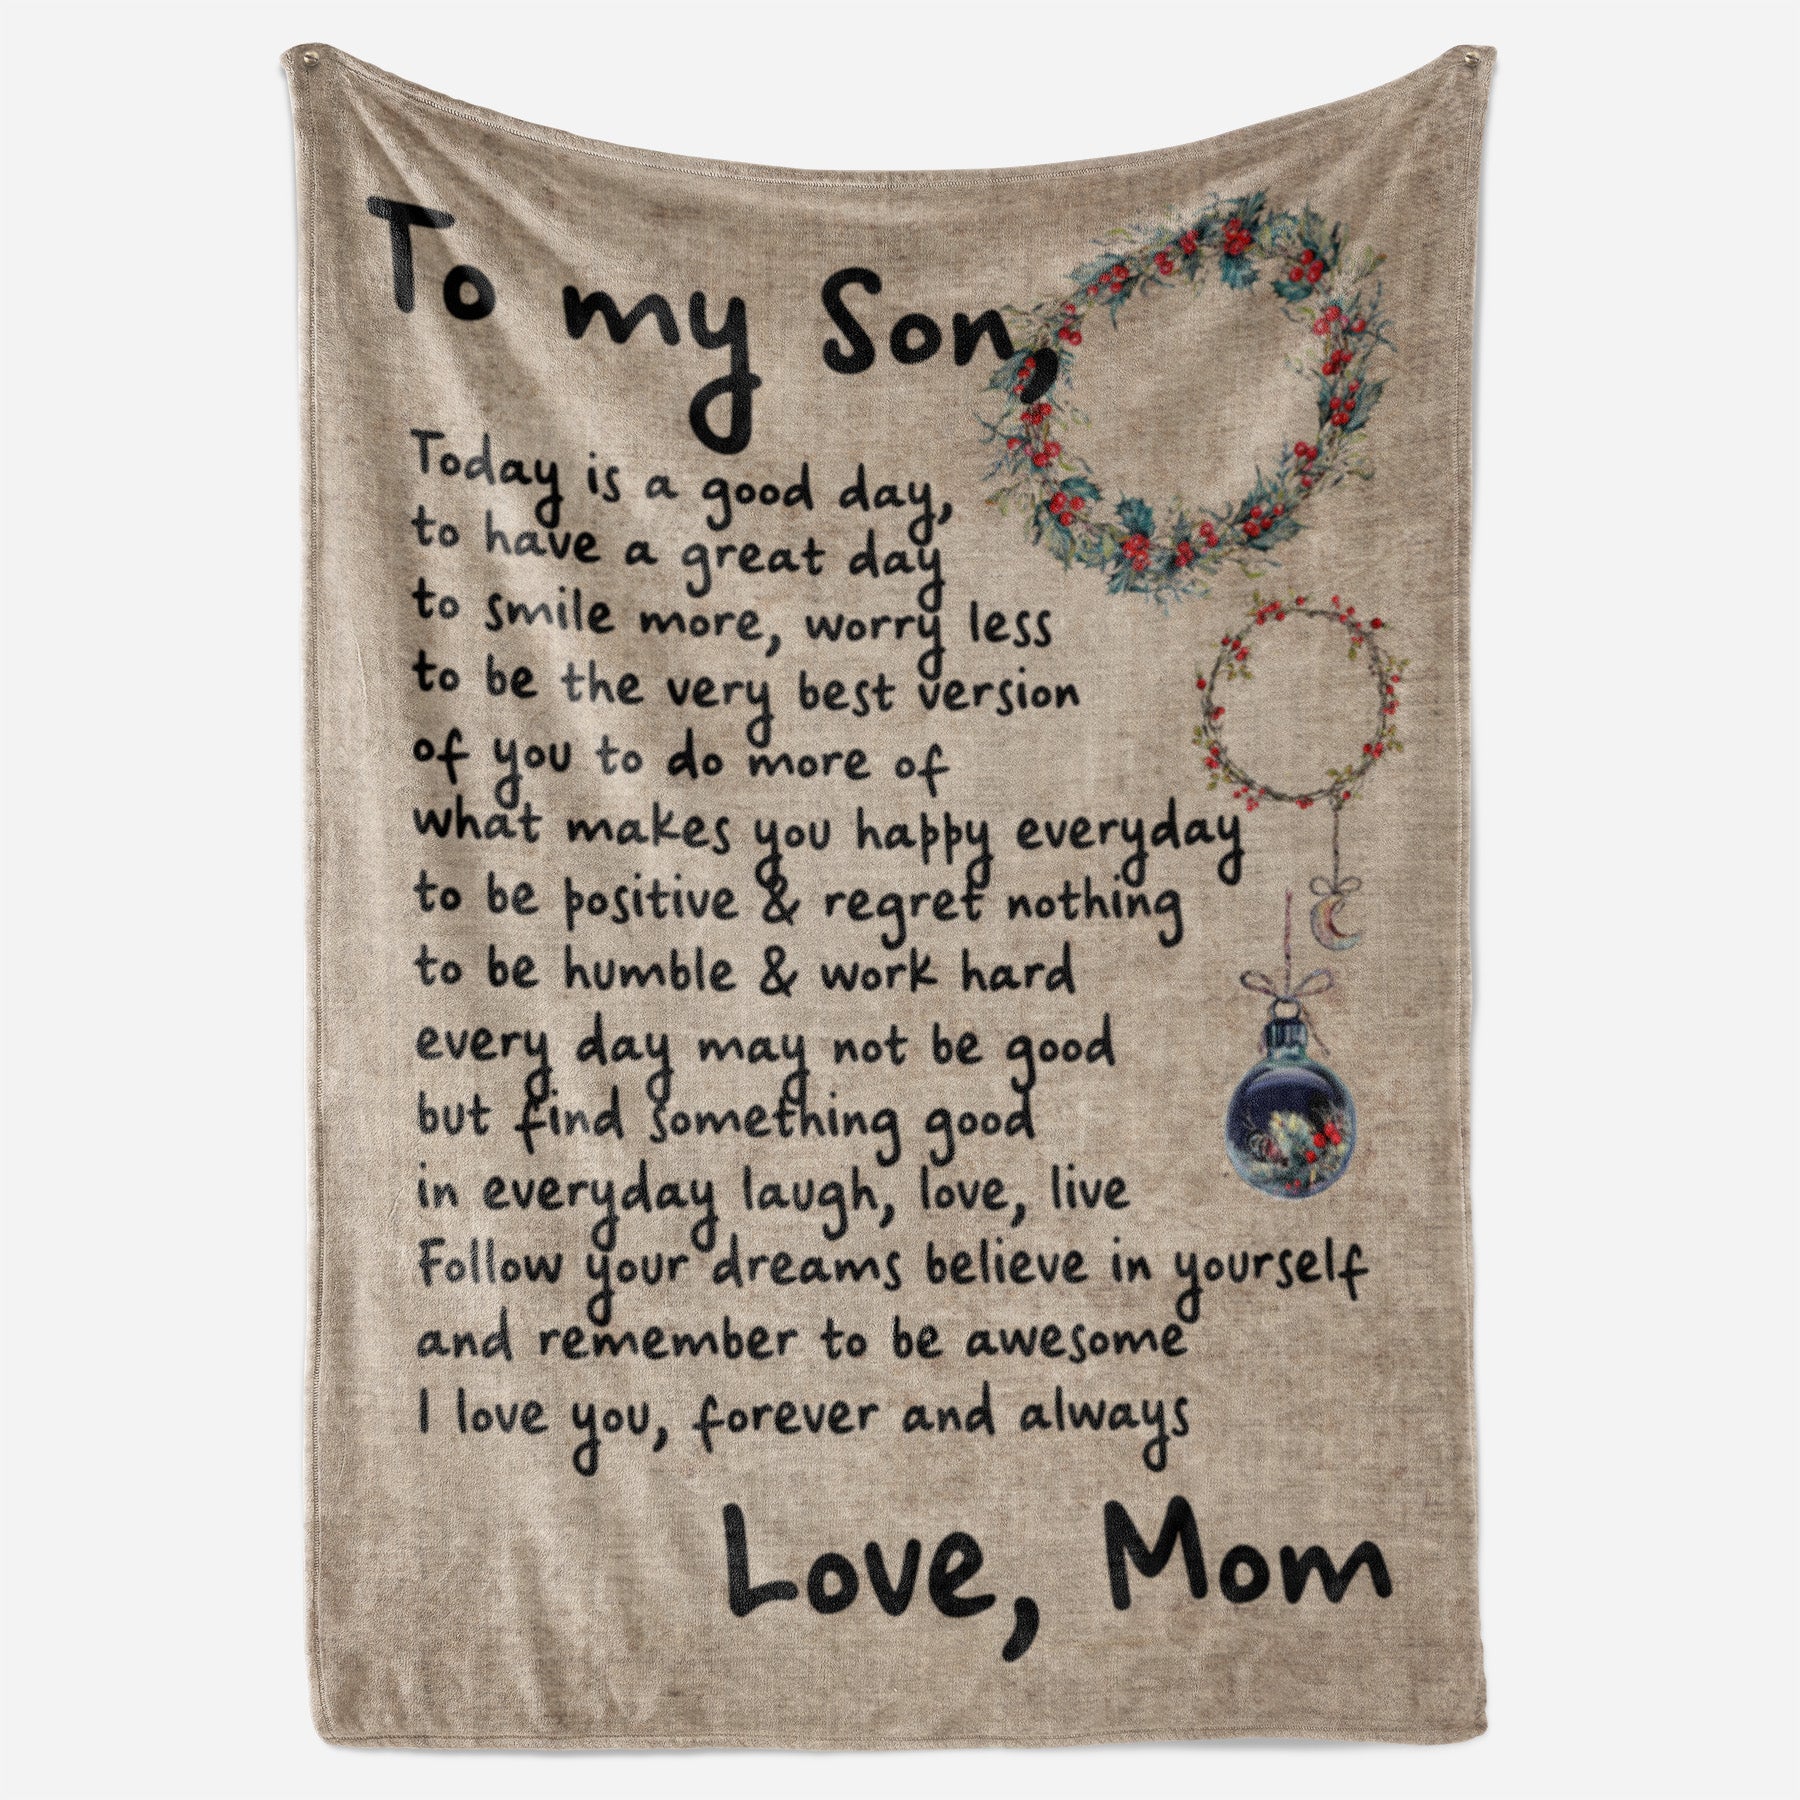 LARIAU Son Blanket Gifts from Mom, Gifts for My Son from Mom, Mom to Son Blanket Gifts, to My Son Blanket from Mom, Birthday Gifts for Son, Son